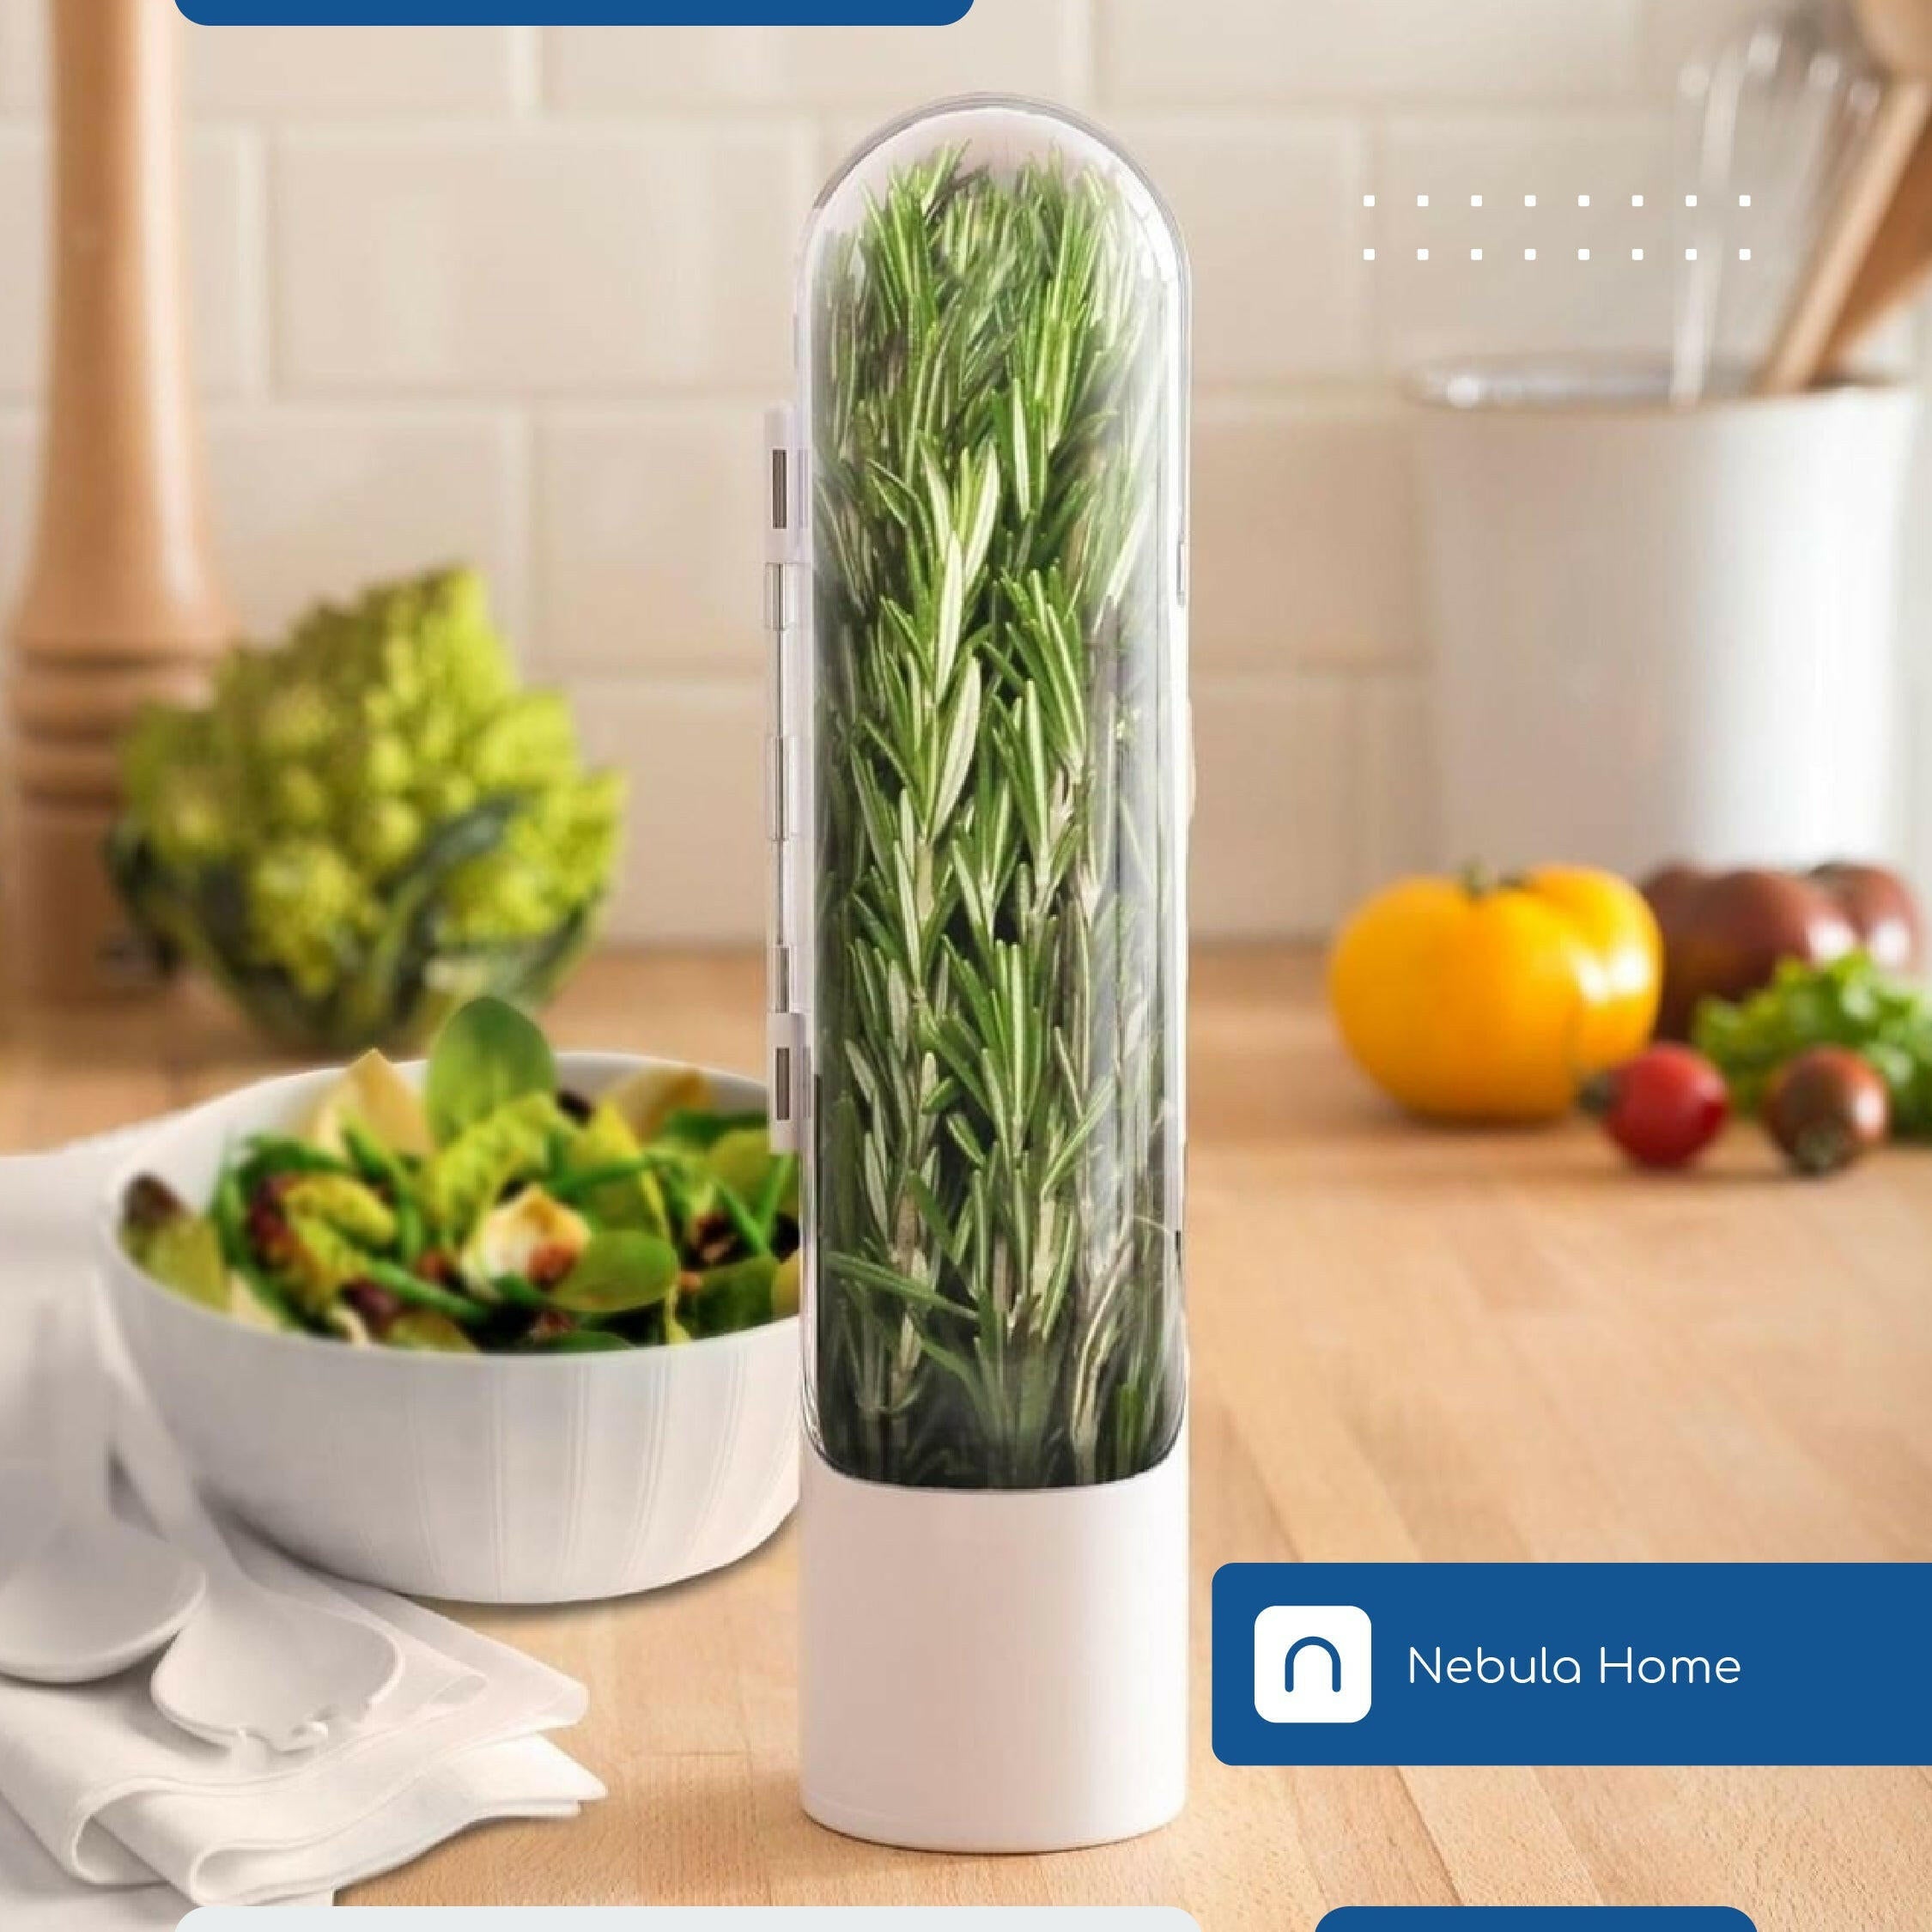 Fresh Herb Saver: Extend Herb Life with Ease!